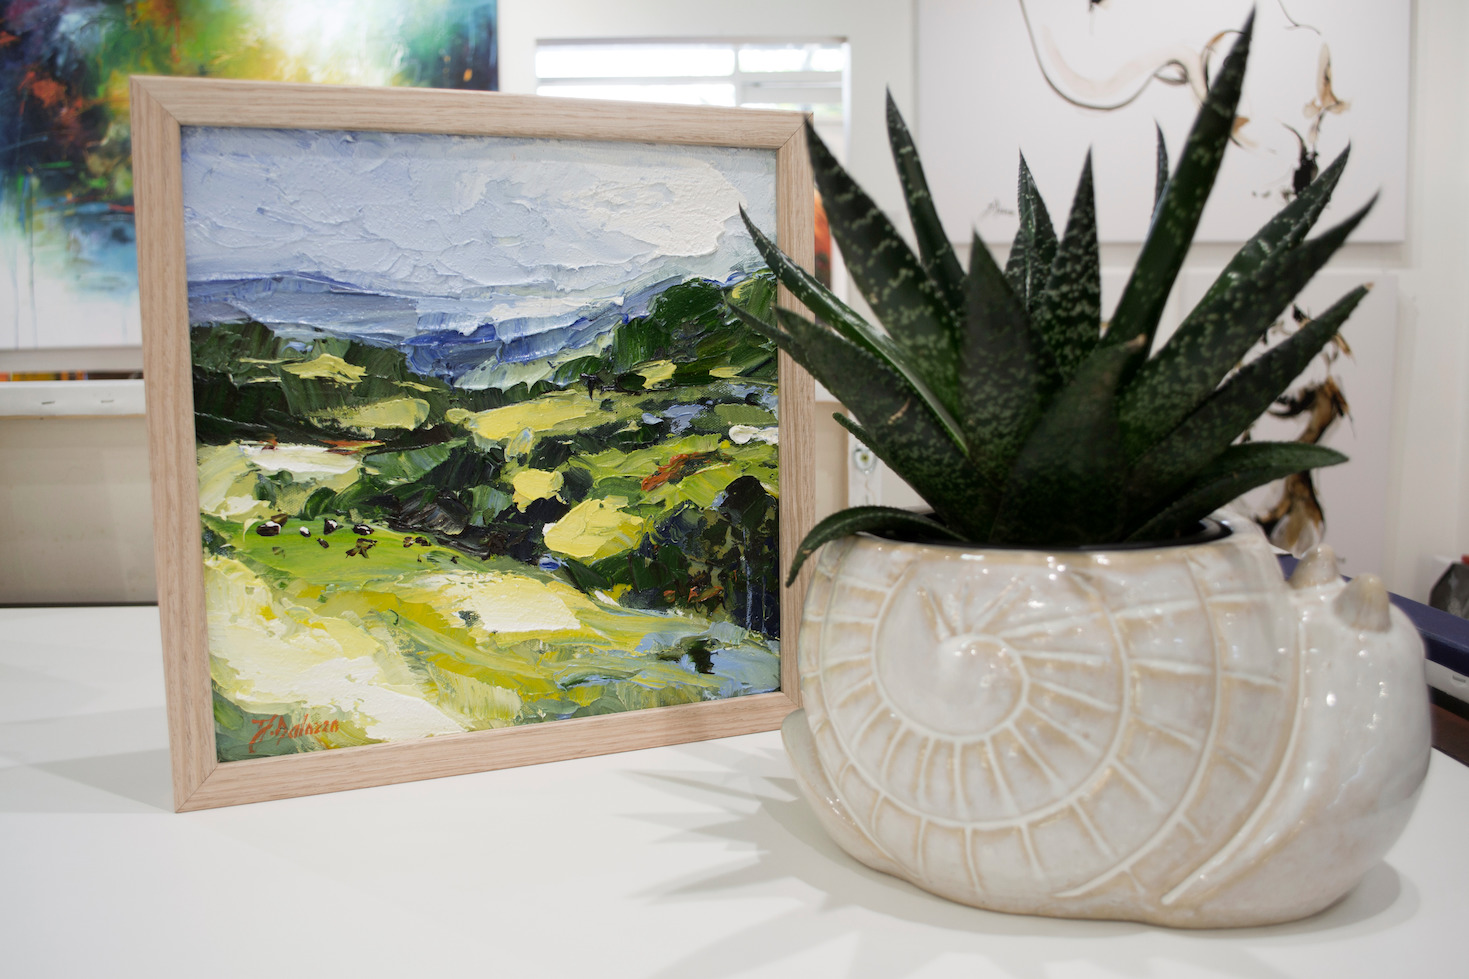 Wall Design Ideas With Landscape Painting "Numinbah Valley Livestock Property" By Judith Dalozzo